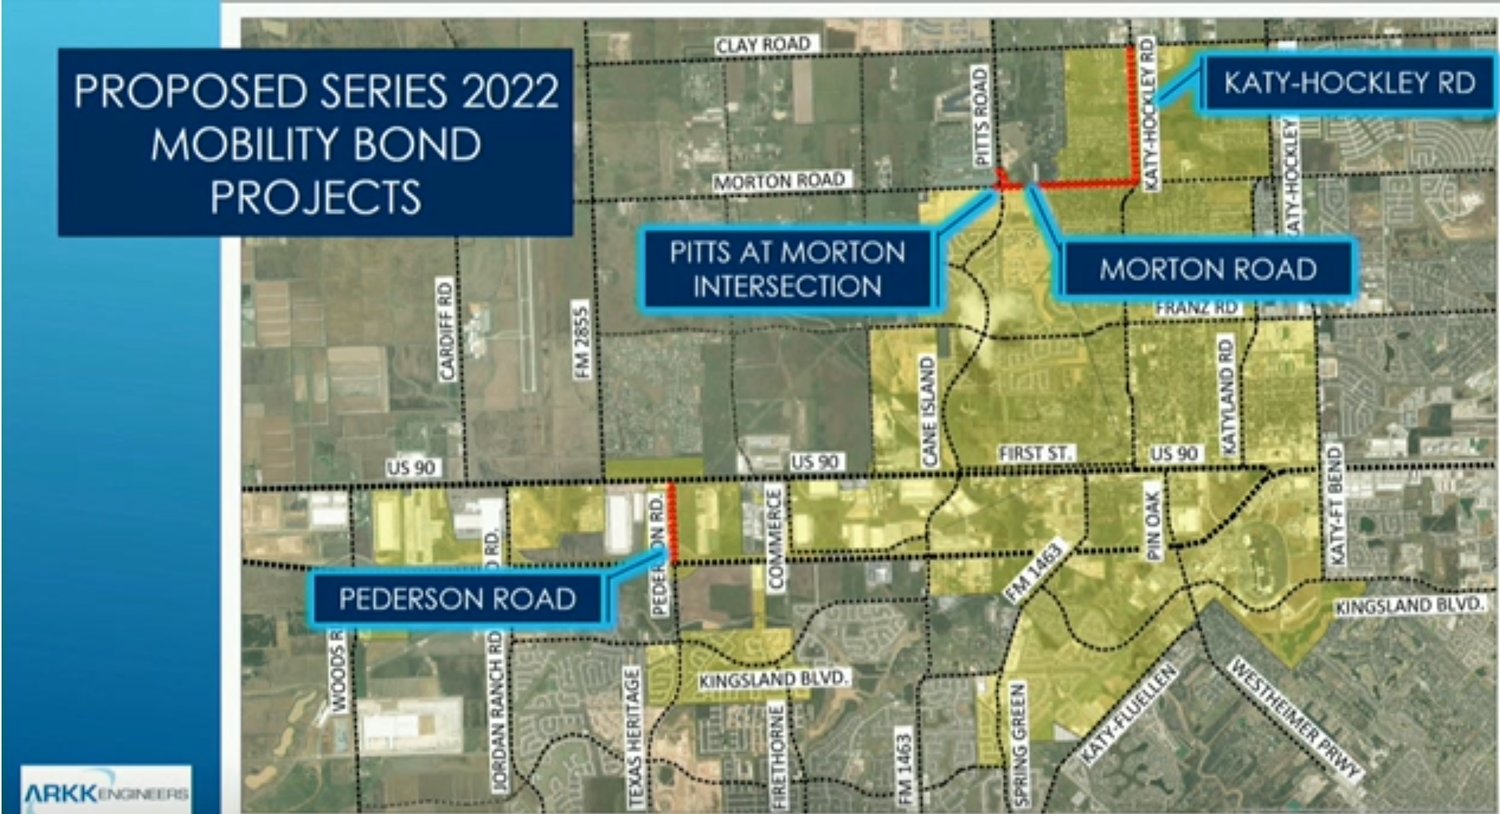 A map of the road bond projects to be covered by bonds approved for issuance by the Katy City Council Jan. 10.